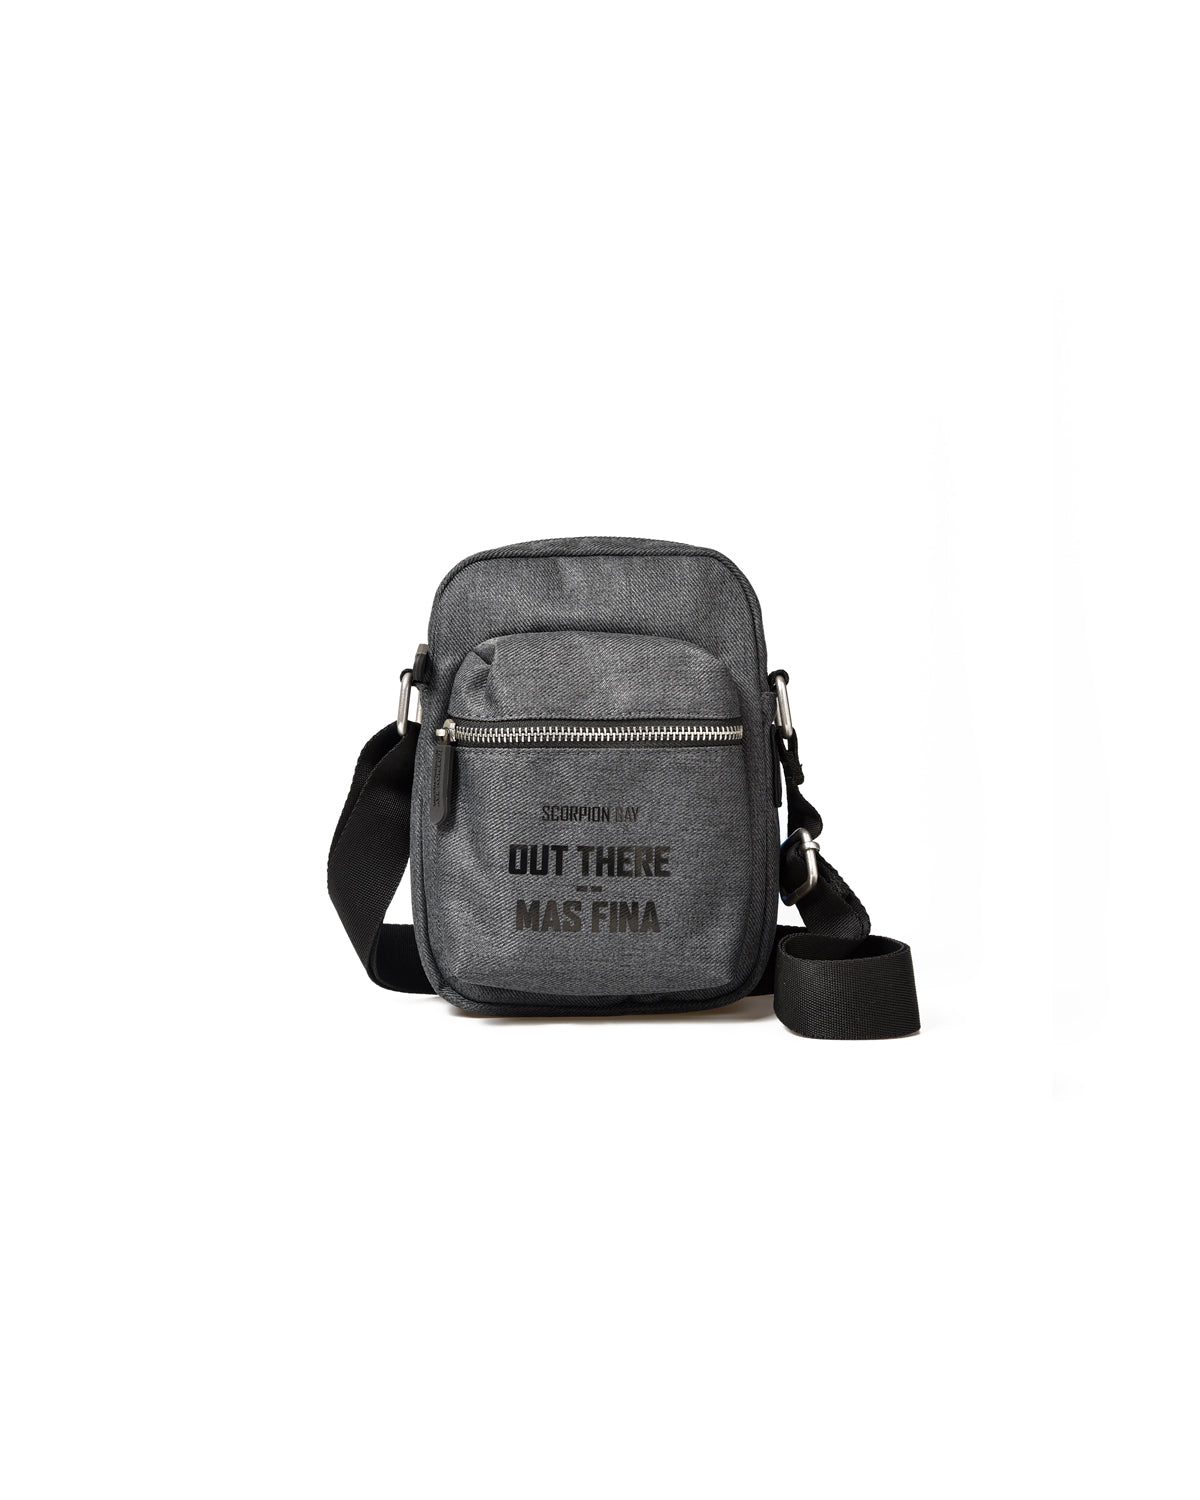 Small Anthracite Shoulder Bag With Pockets And Zip Closure